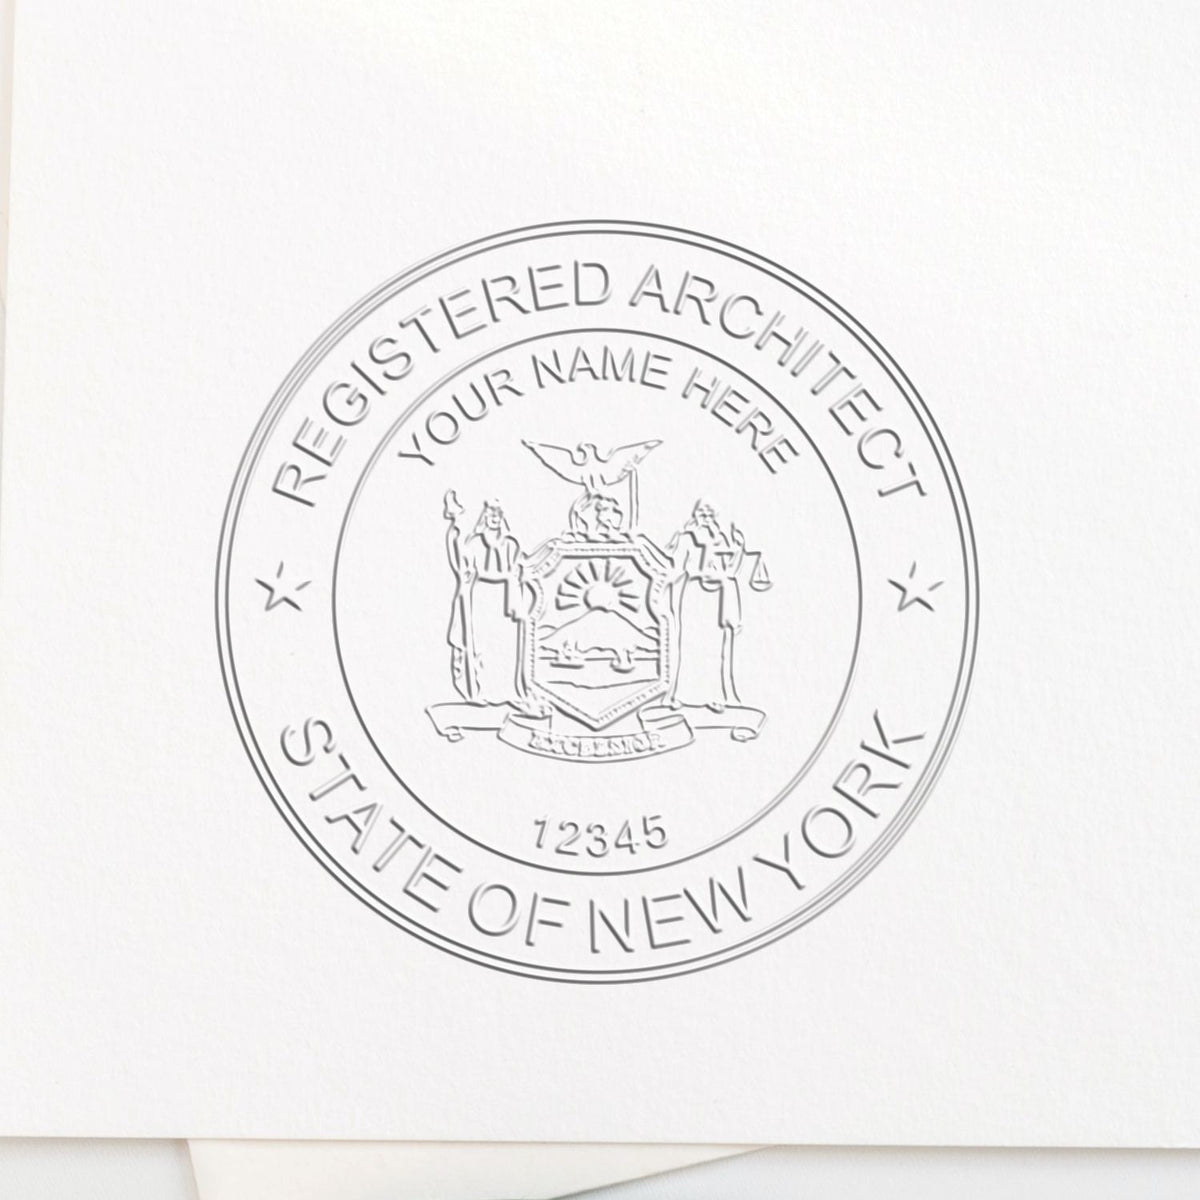 The Gift New York Architect Seal stamp impression comes to life with a crisp, detailed image stamped on paper - showcasing true professional quality.